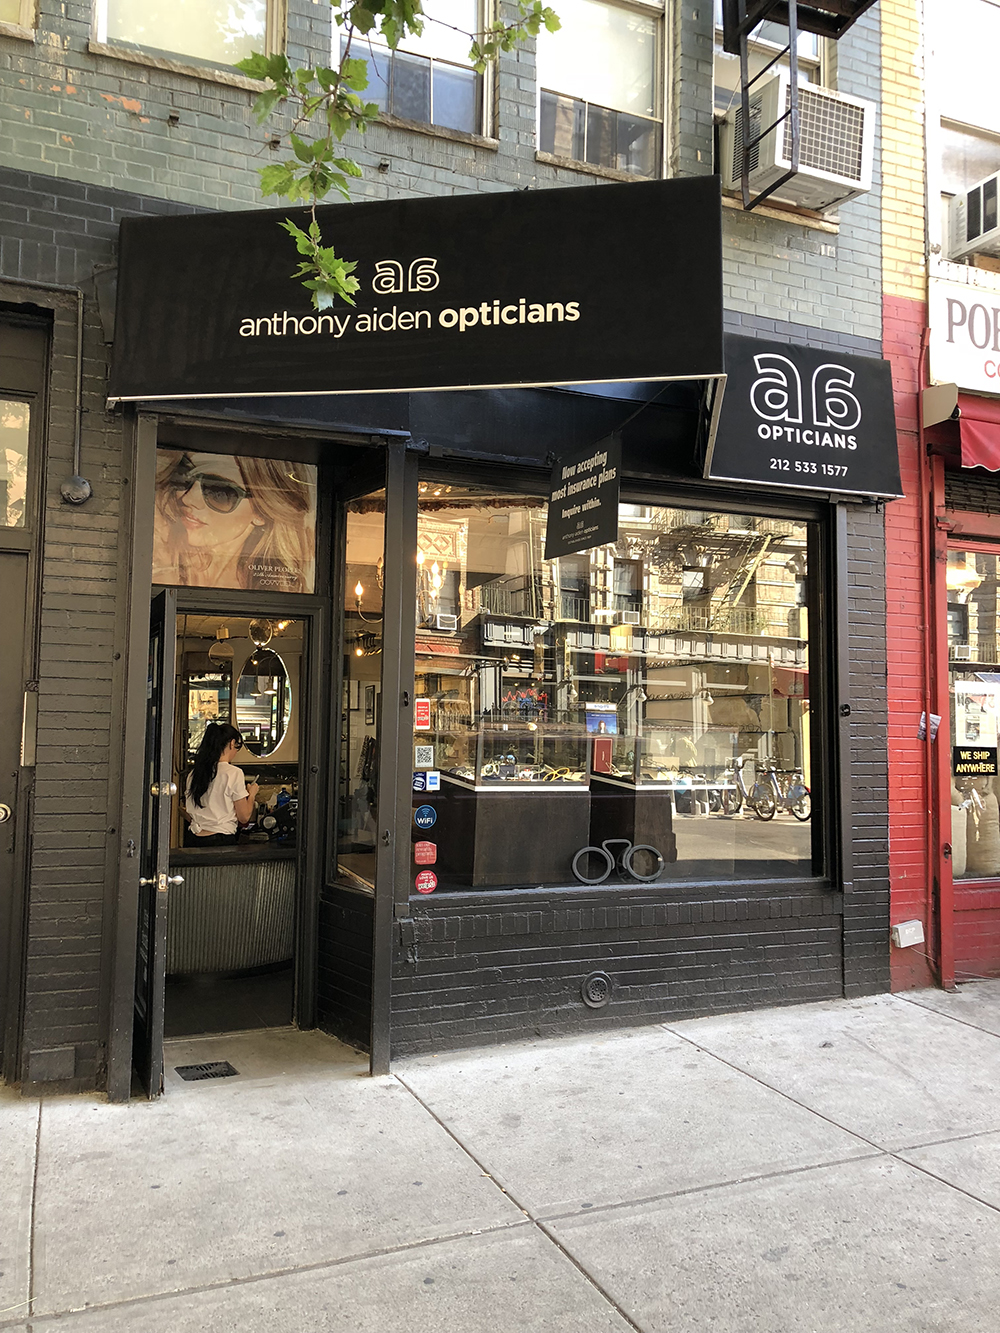 12 Images That Show Why New York’s Anthony Aiden Opticians Was Named One of America’s Finest Optical Retailers